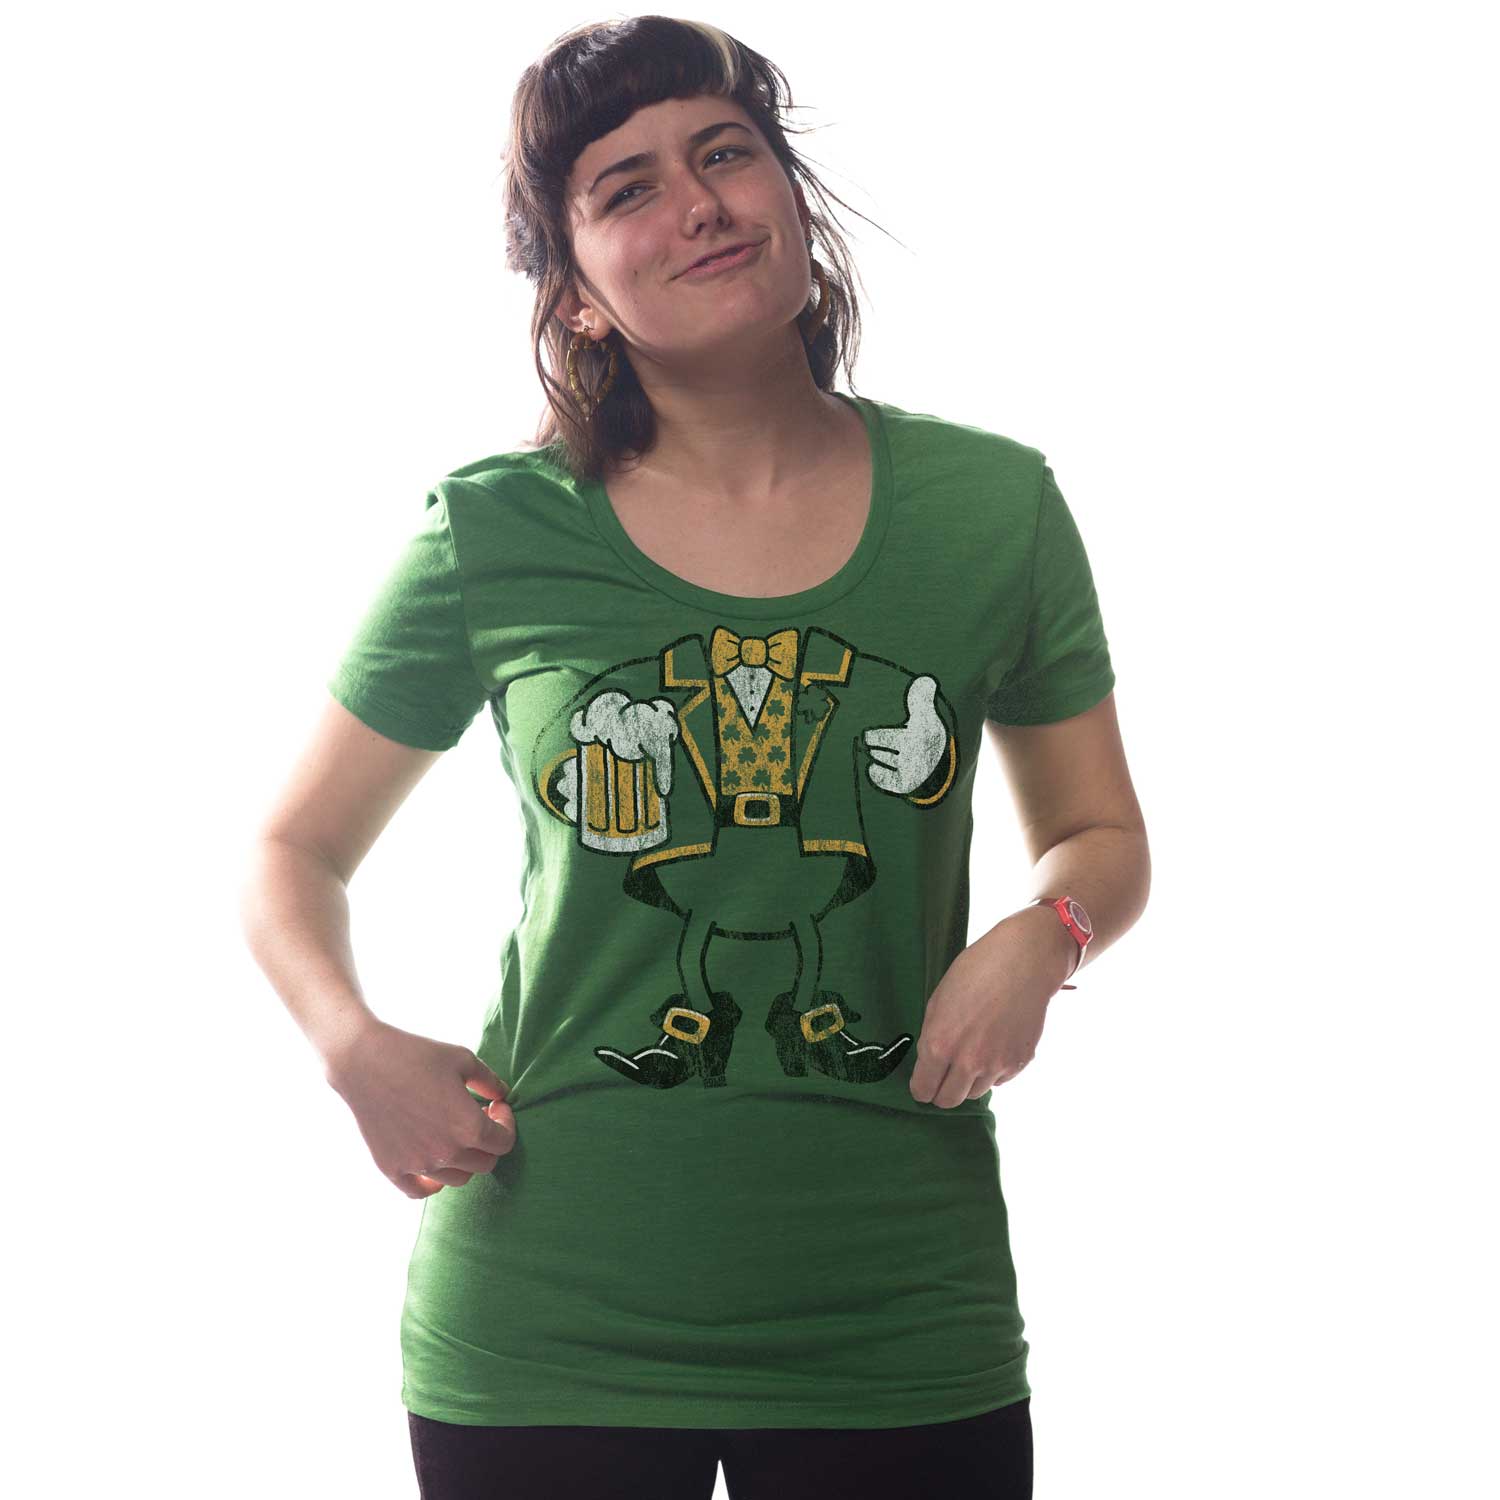 Women's Leprechaun Look A Like Vintage Graphic T-Shirt | Funny St Paddy's Soft Tee | Solid Threads